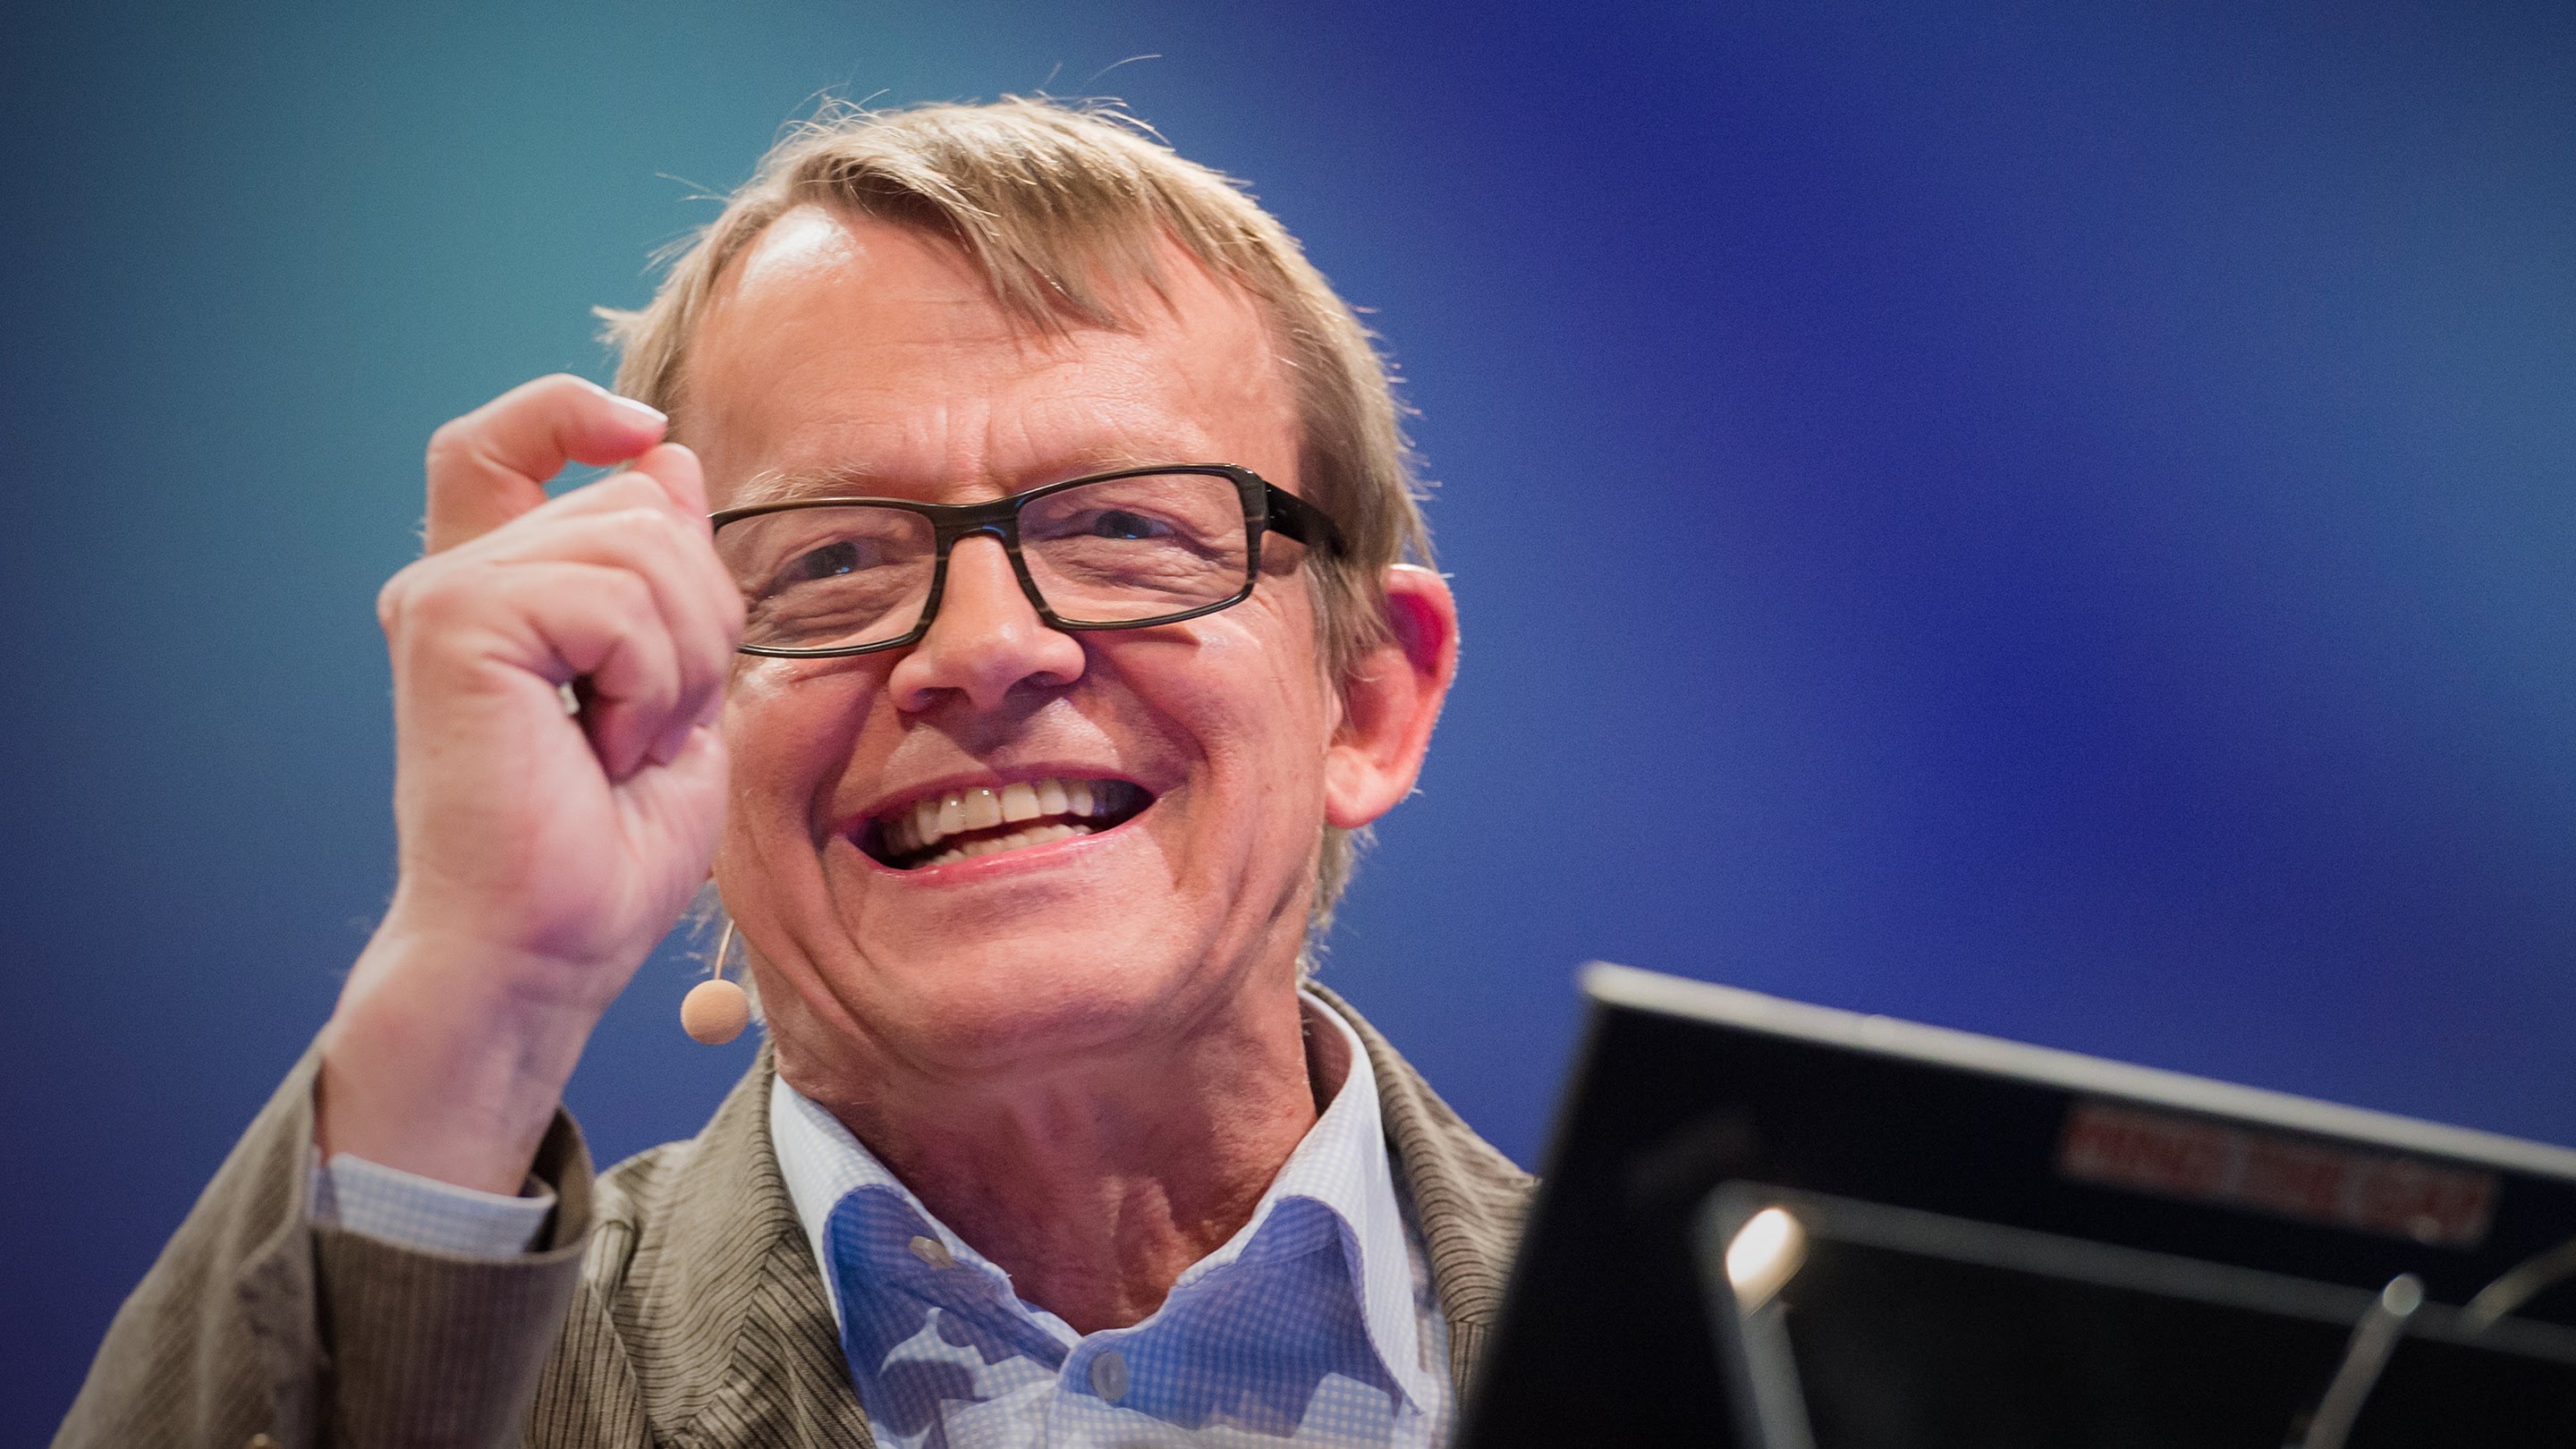 Hans Rosling – The fundamental hole in media coverage